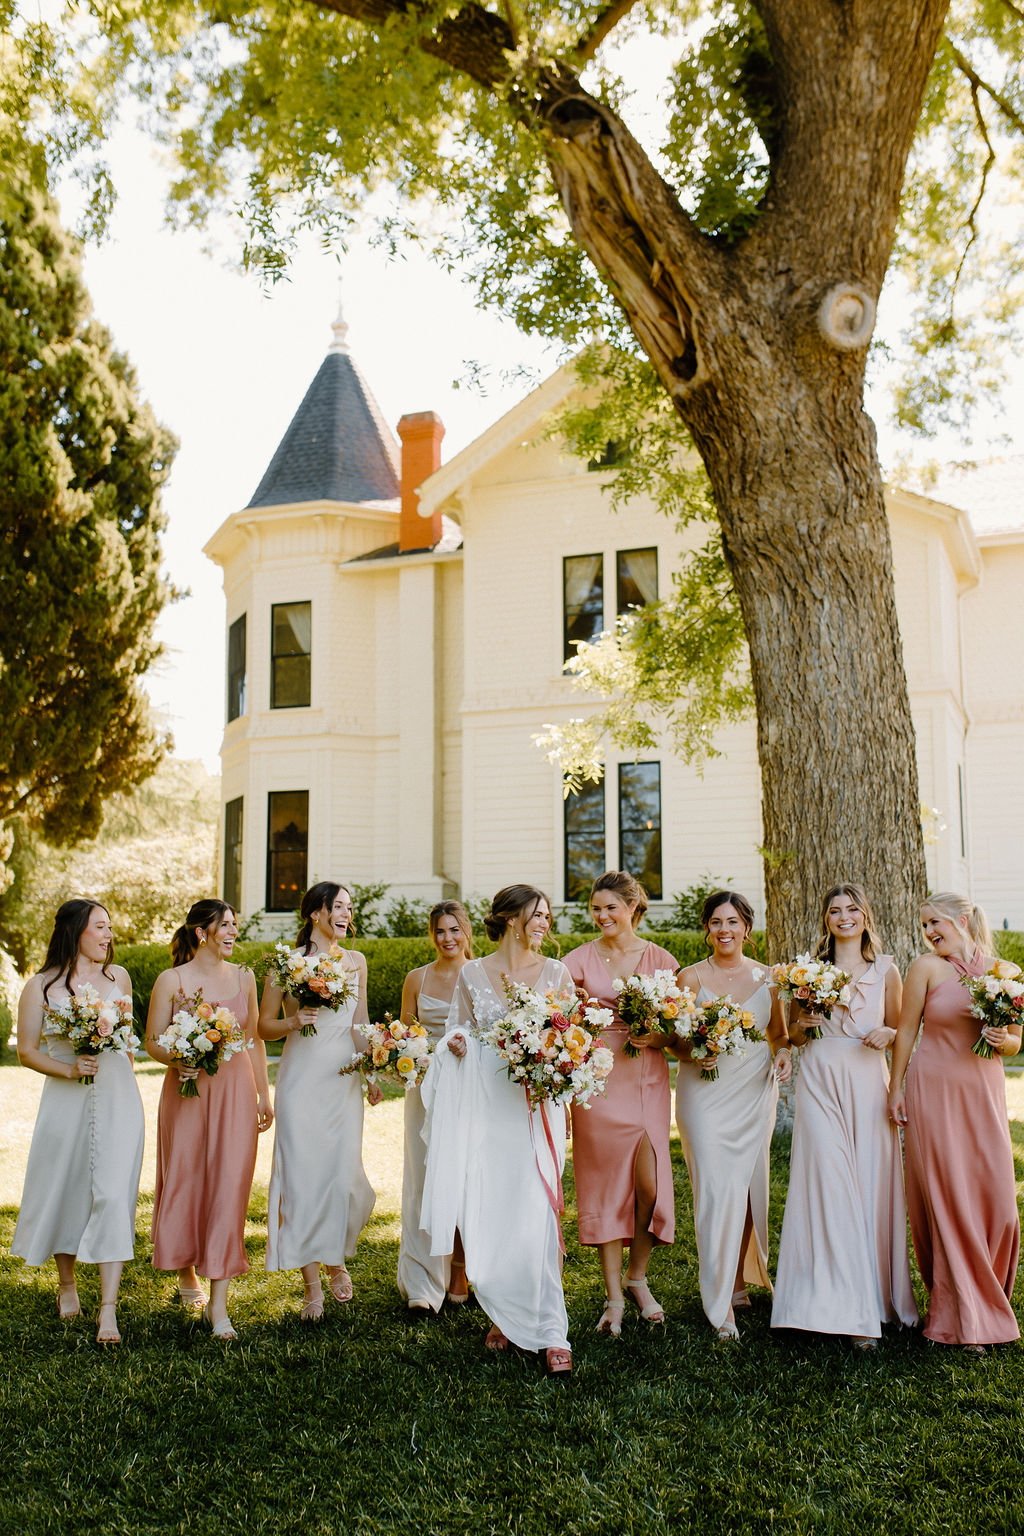 Boho bride with chic blush bridal party